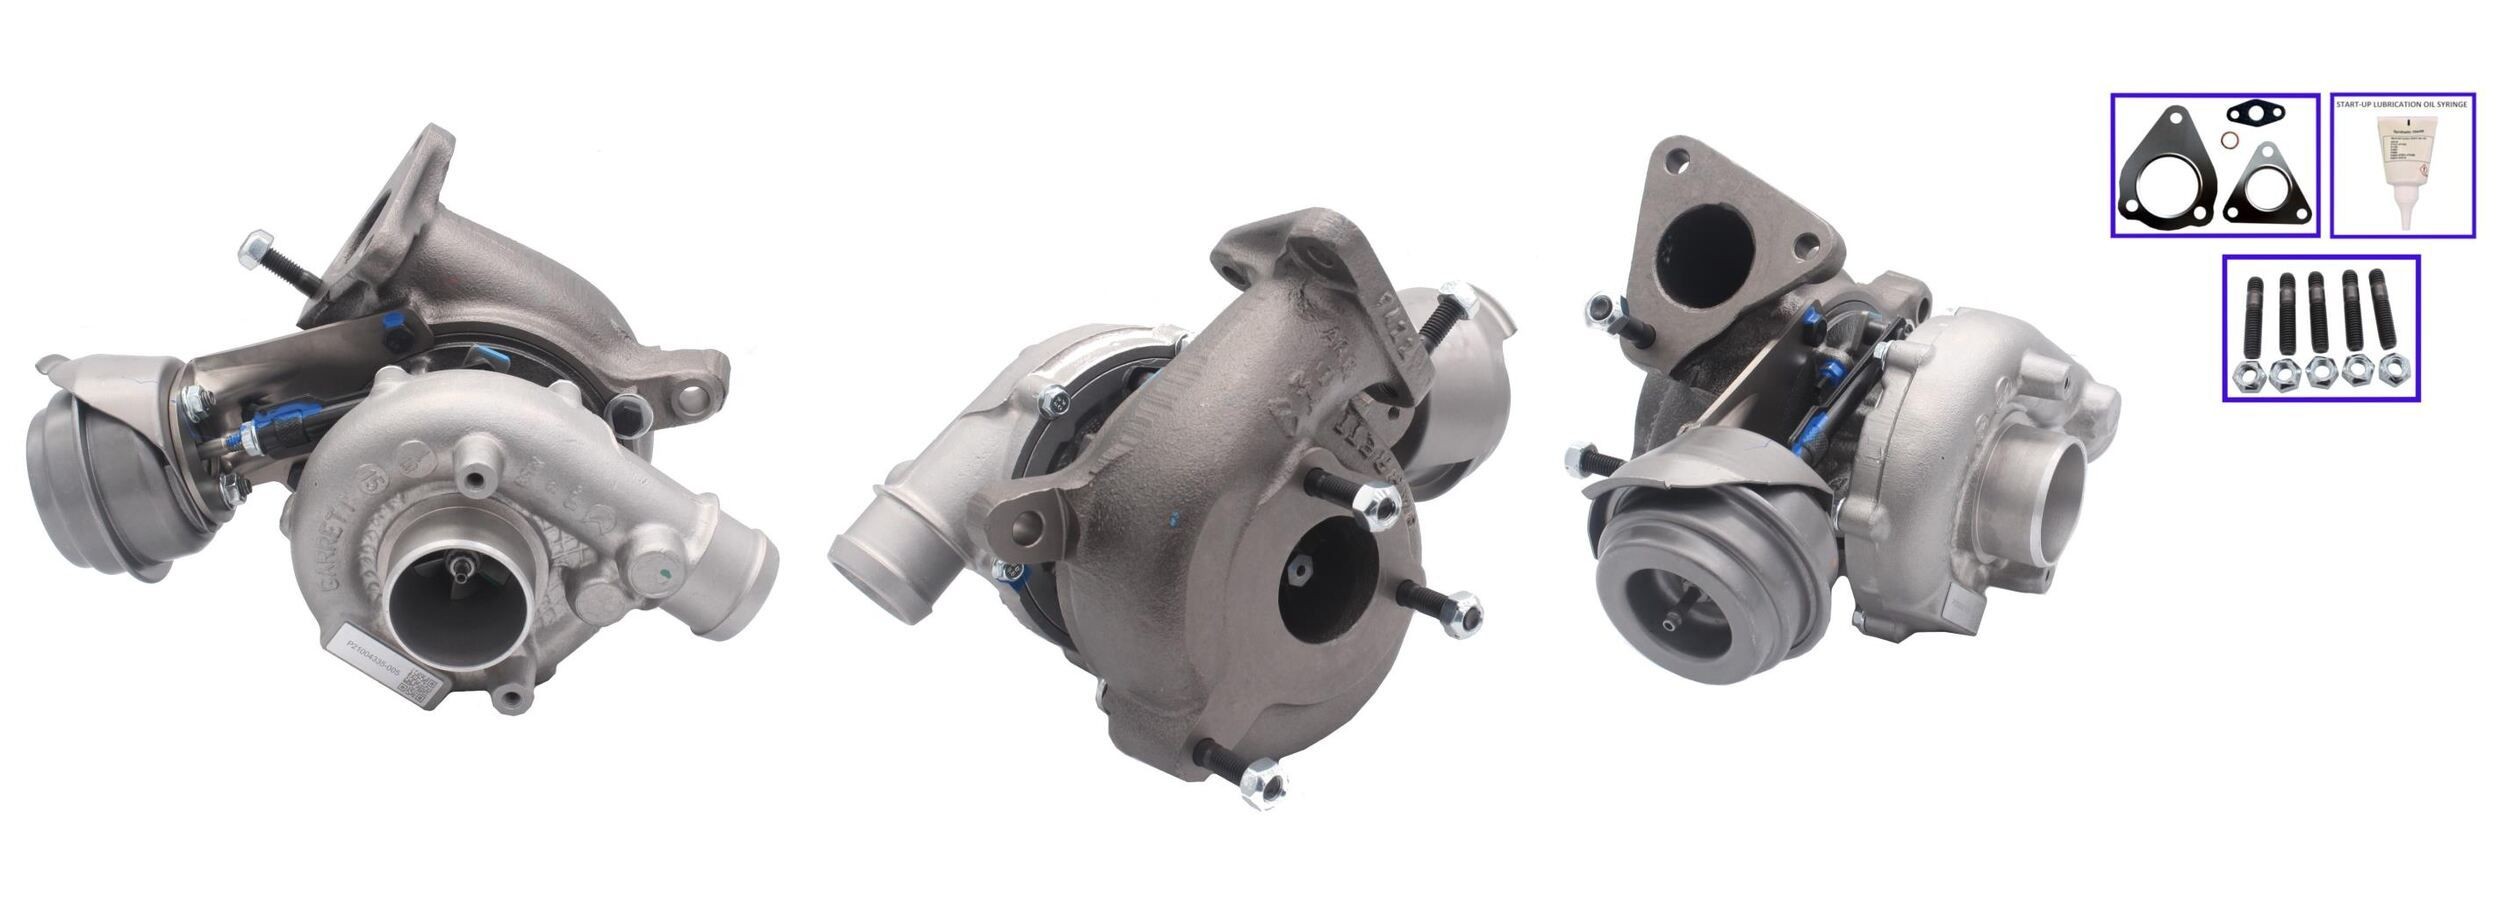 LUCAS LTRPA4542312 Turbocharger Exhaust Turbocharger, Pneumatically controlled actuator, with gaskets/seals